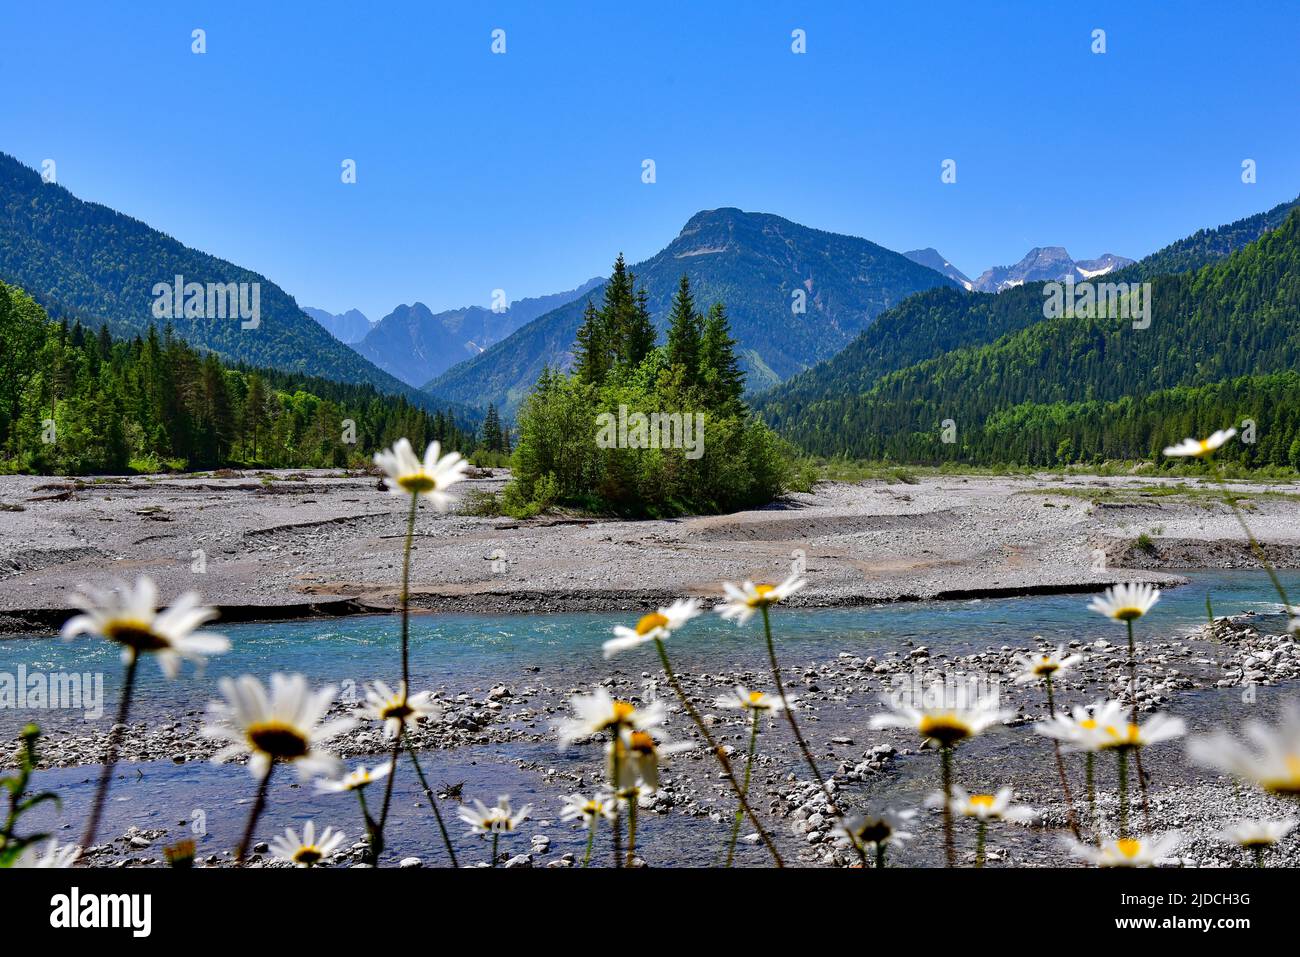 On the upper reaches of the Isar near Vorderriss, view of the Karwendel mountains, district of Bad Tölz-Wolfratshausen, Bavaria, Germany, Europe Stock Photo